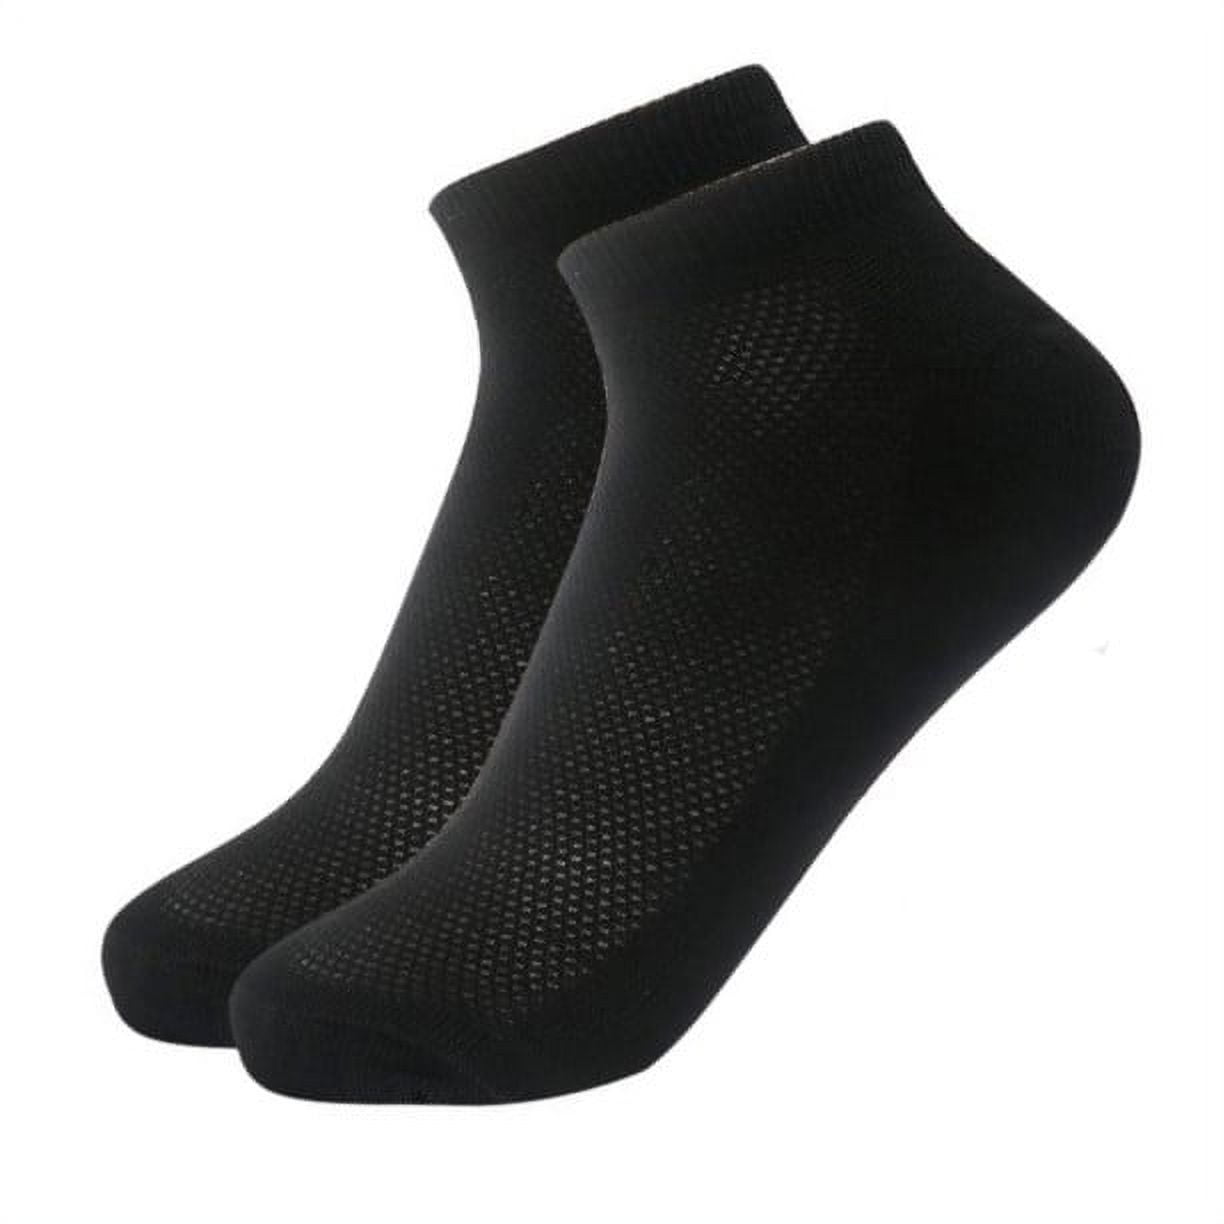 Winter Lined Wool Socks Lambs Cozy Thick Heavy Thermal Boots Socks